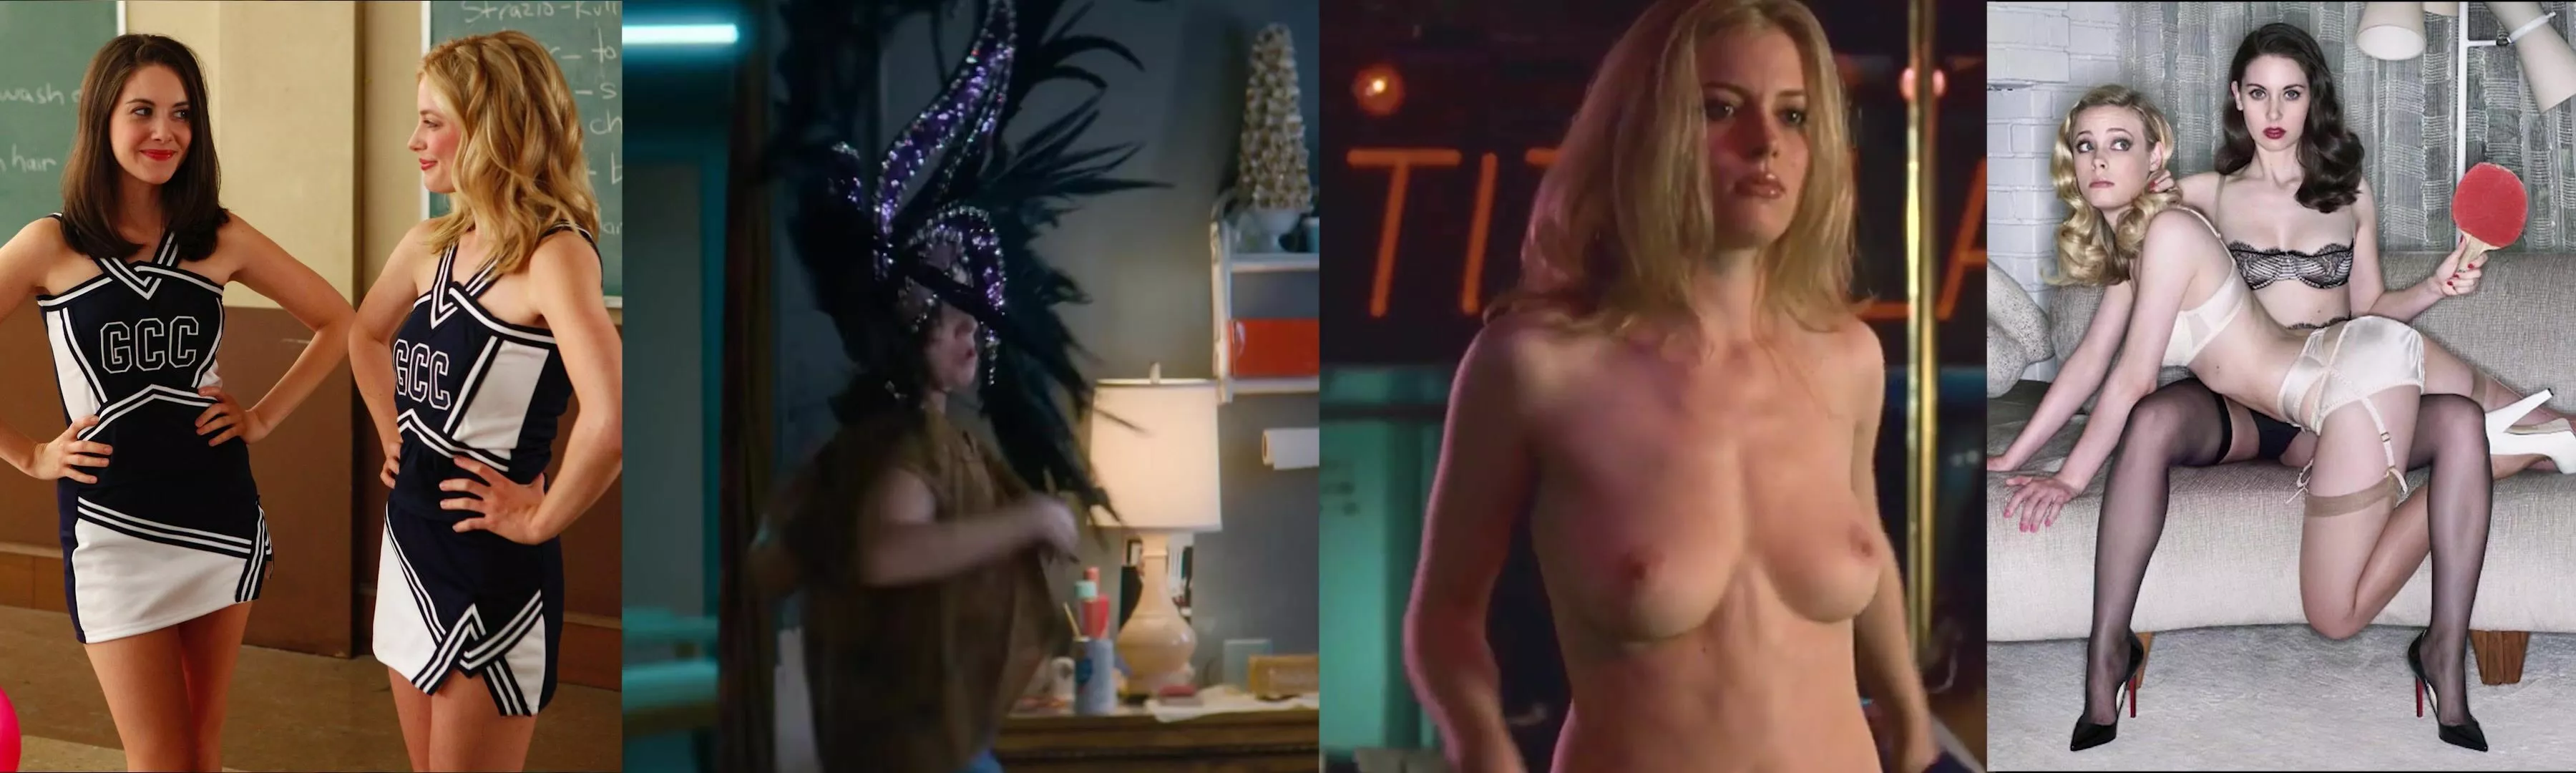 Gillian Jacobs and Allison Brie Talk Acting in Nude Scenes and More.